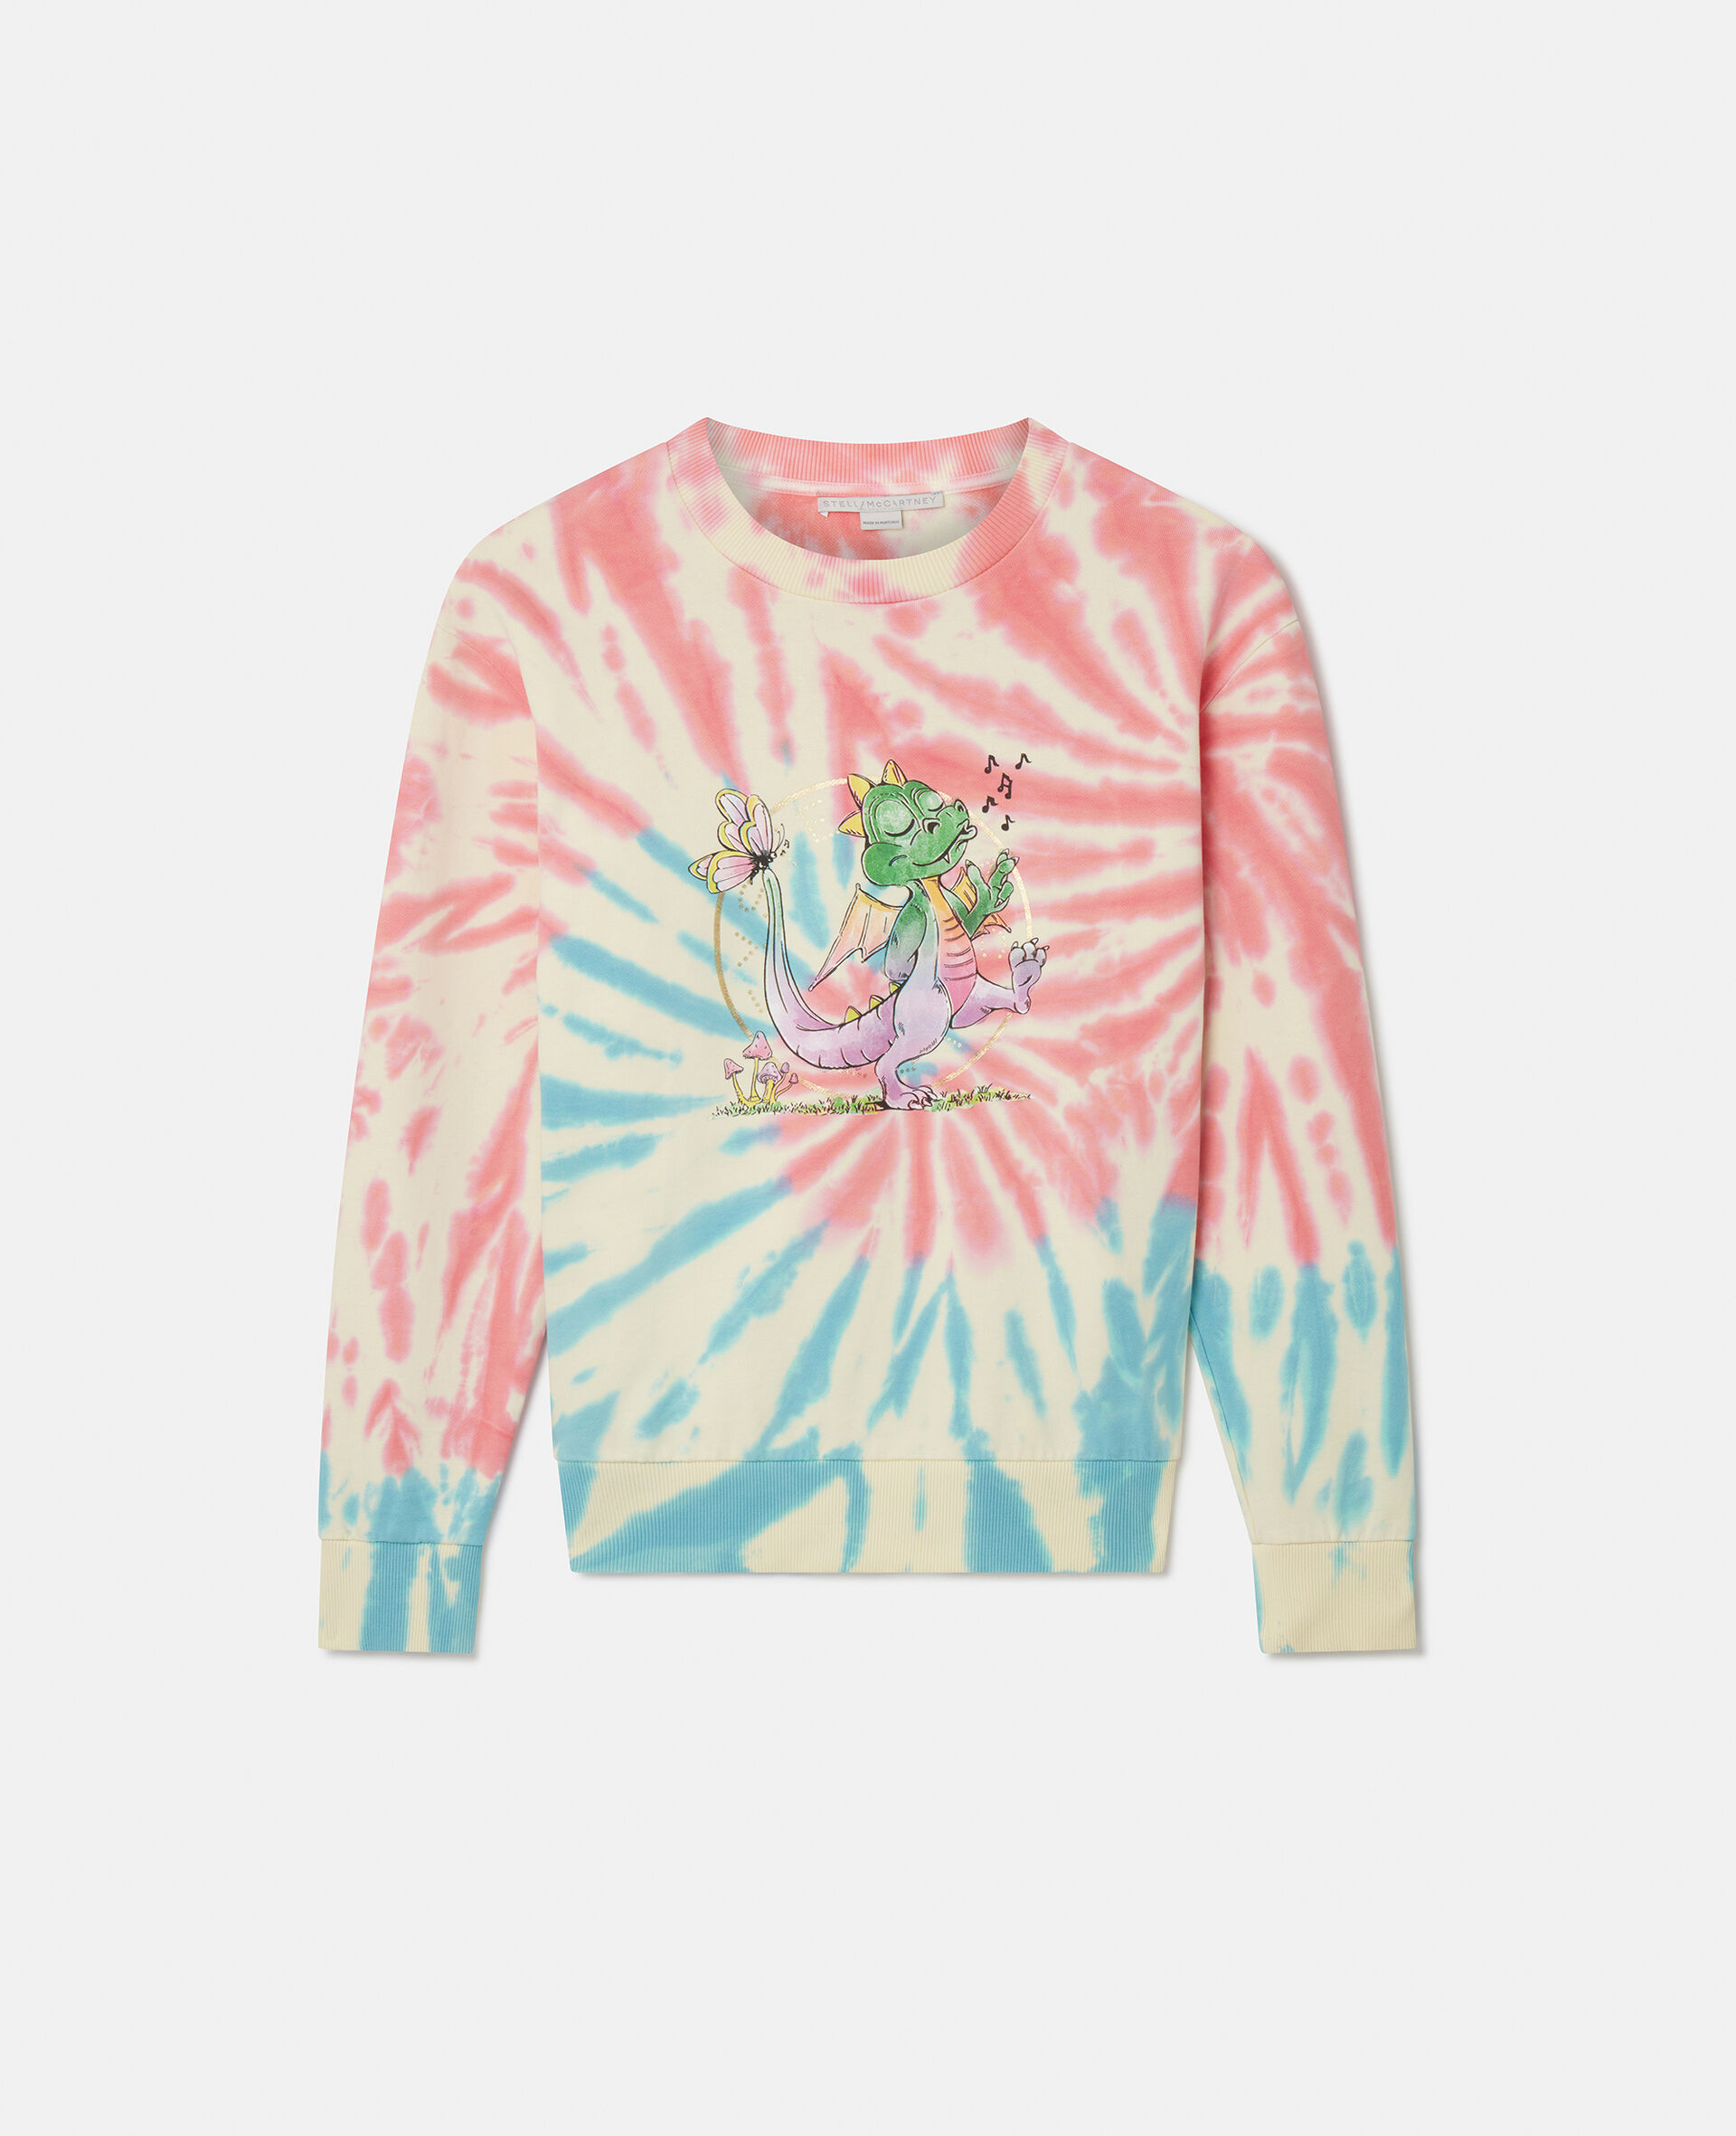 Year of the Dragon Tie-Dye Sweatshirt-Multicolour-large image number 0